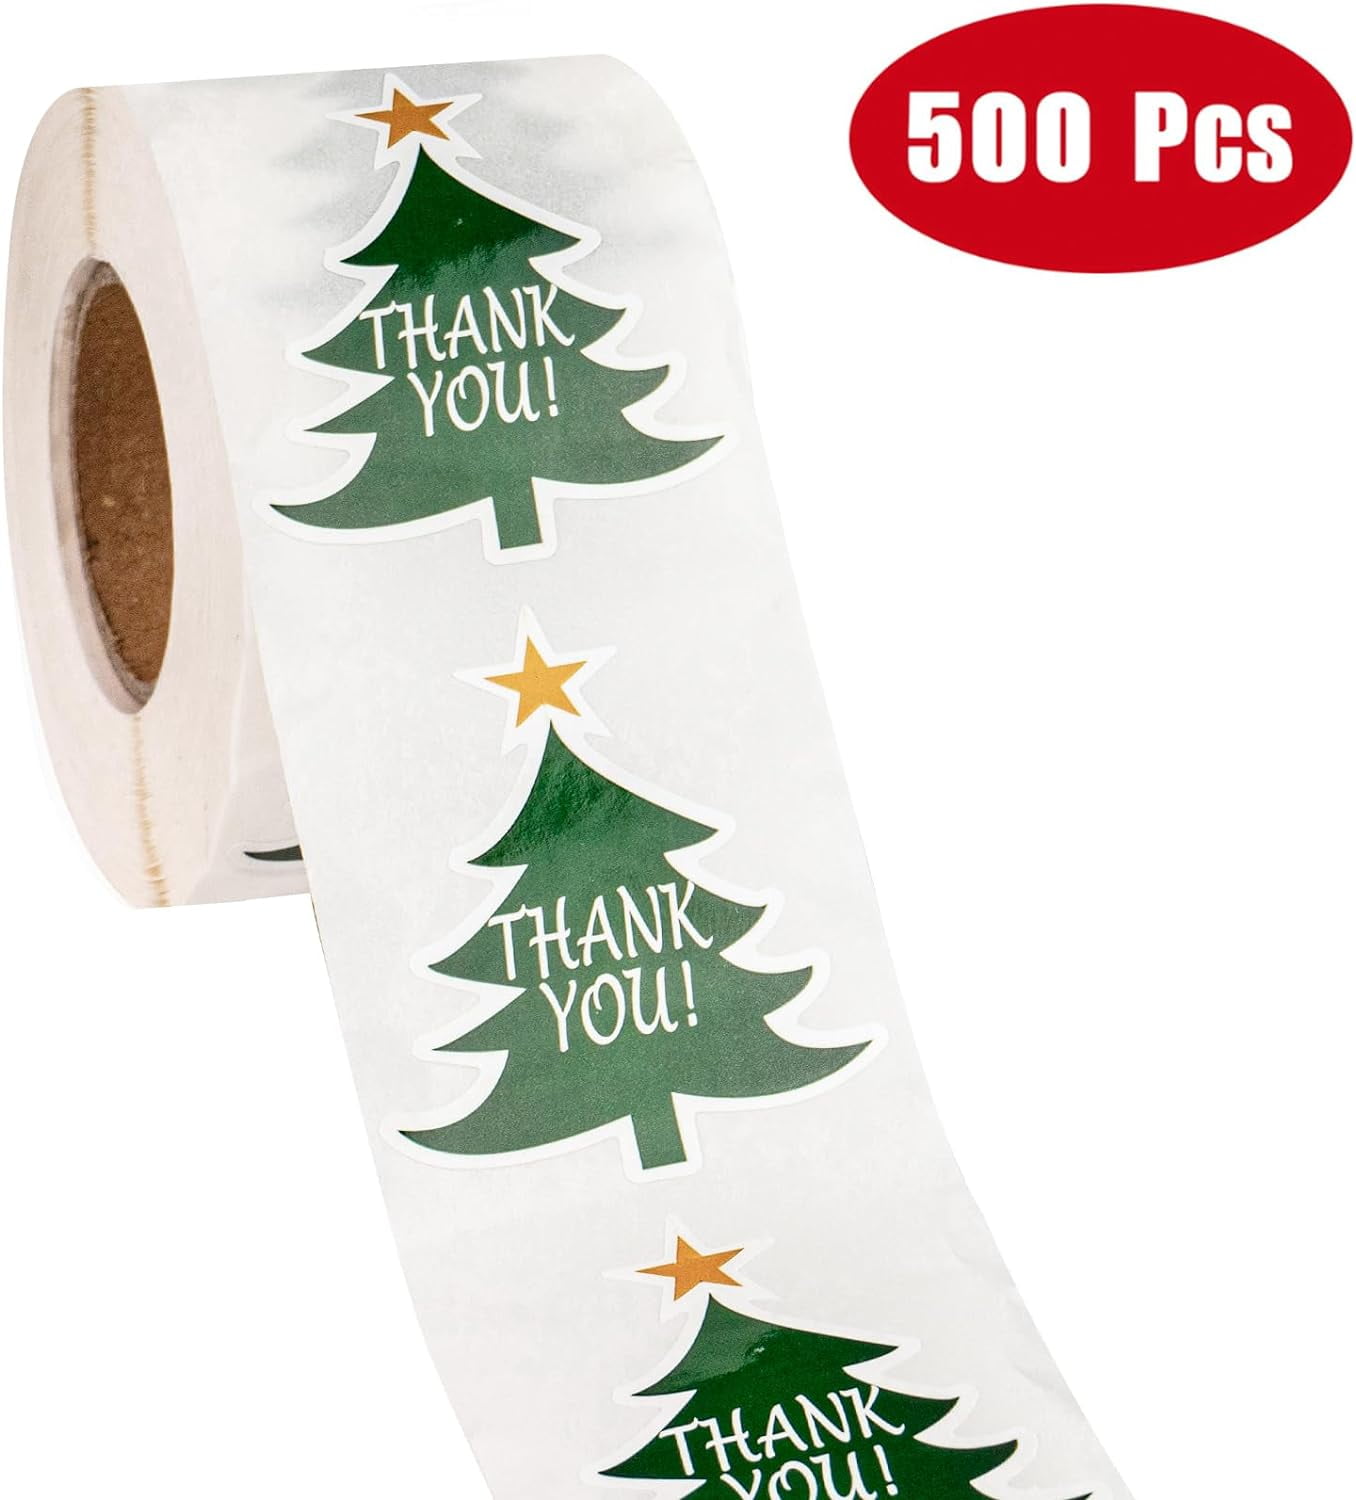 RUSPEPA Christmas Wrapping Paper Rolls - Mini Roll - 17 inches x 10 feet  per Roll, Total of 3 Rolls - Truck and Snowflake